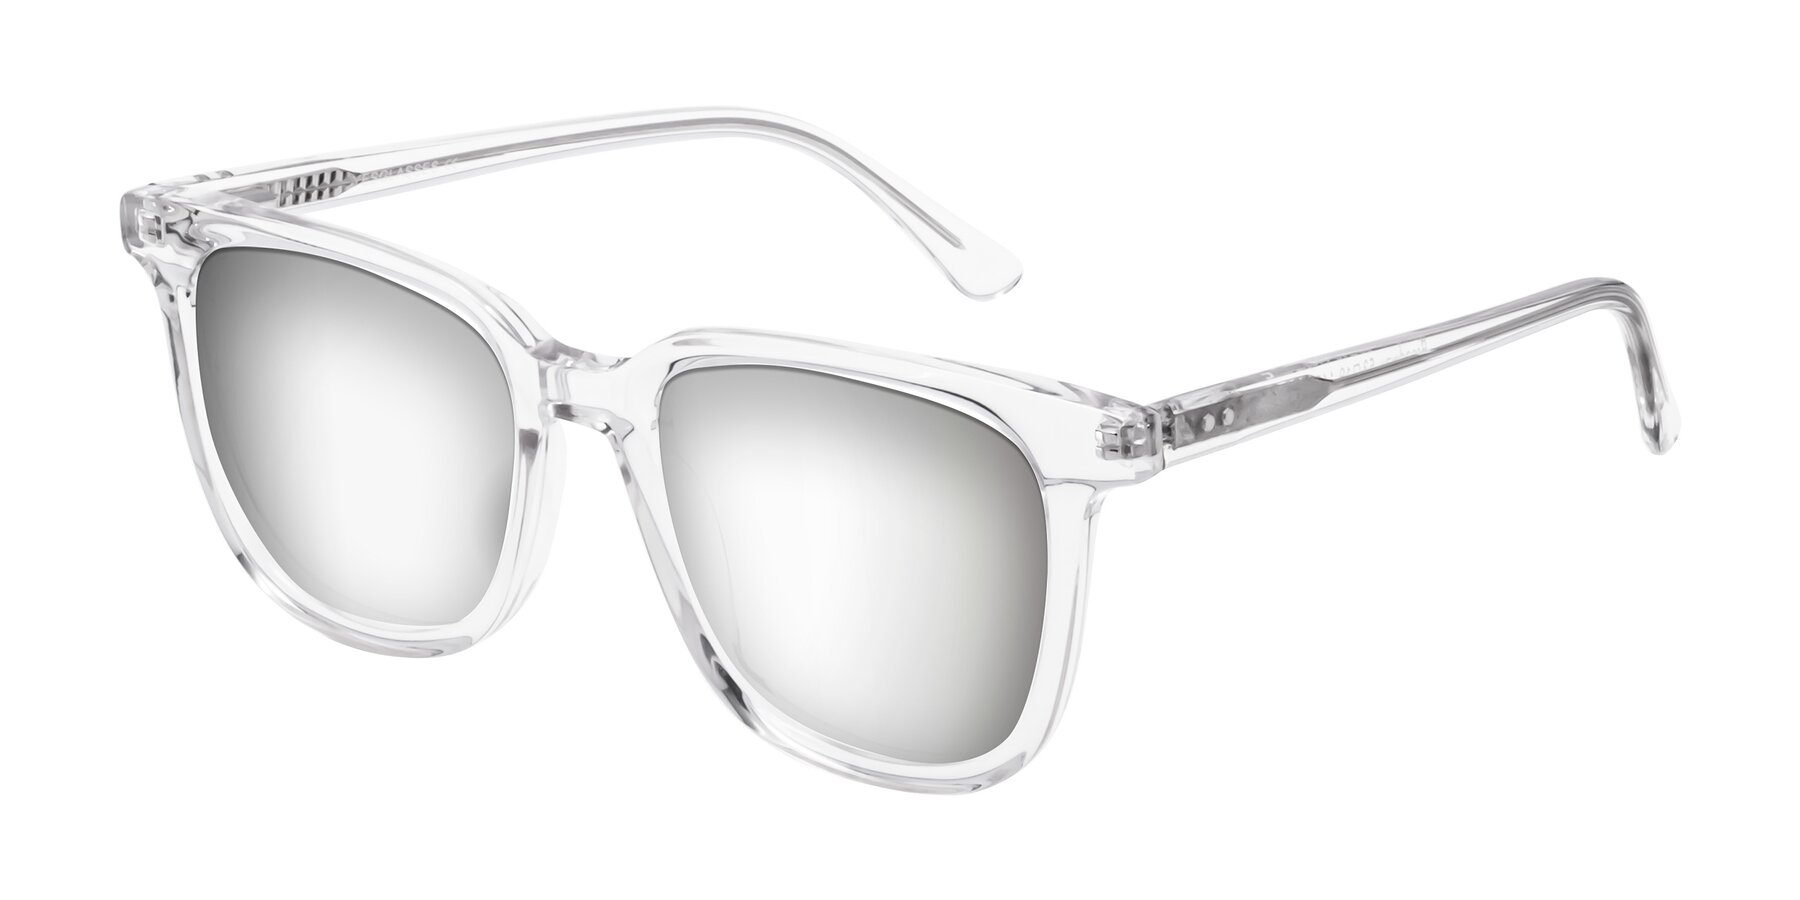 Clear Oversized Acetate Sunglasses Sunwear - Trapezoid Lenses Silver with Mirrored Broadway